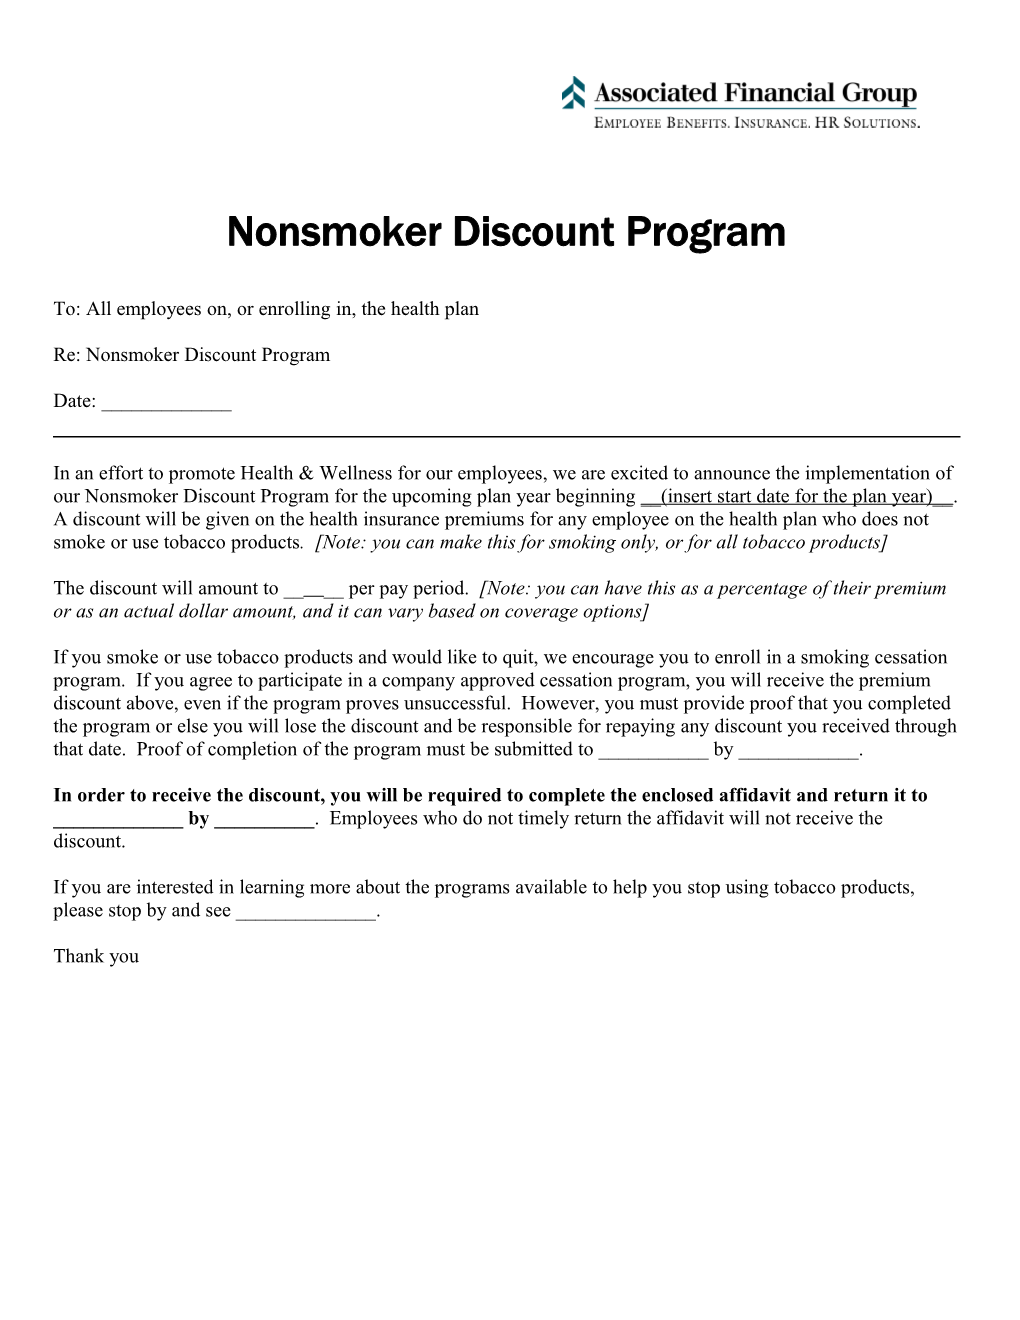 Nonsmoker Discount Program To: All Employees On, Or Enrolling In, the Health Plan